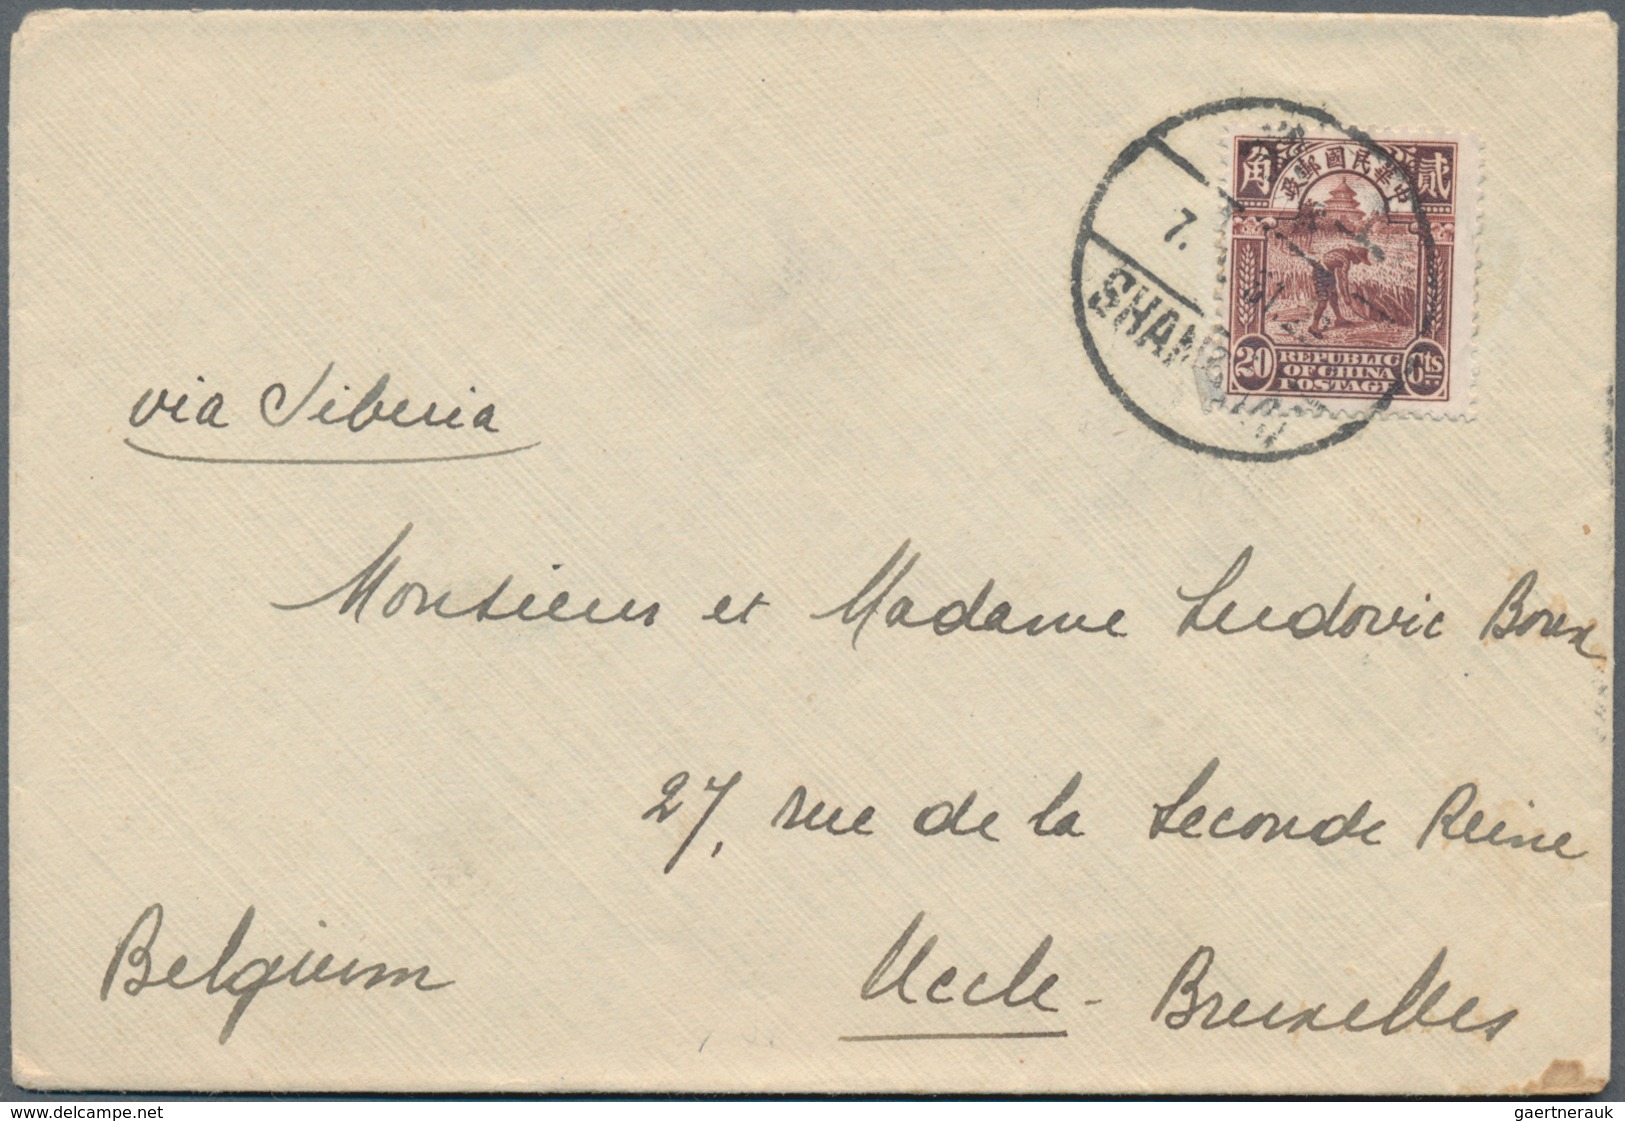 China: 1913/33, junk/reaper on cover (48 inc. few used ppc + 1 front) almost exclusively o foreign i